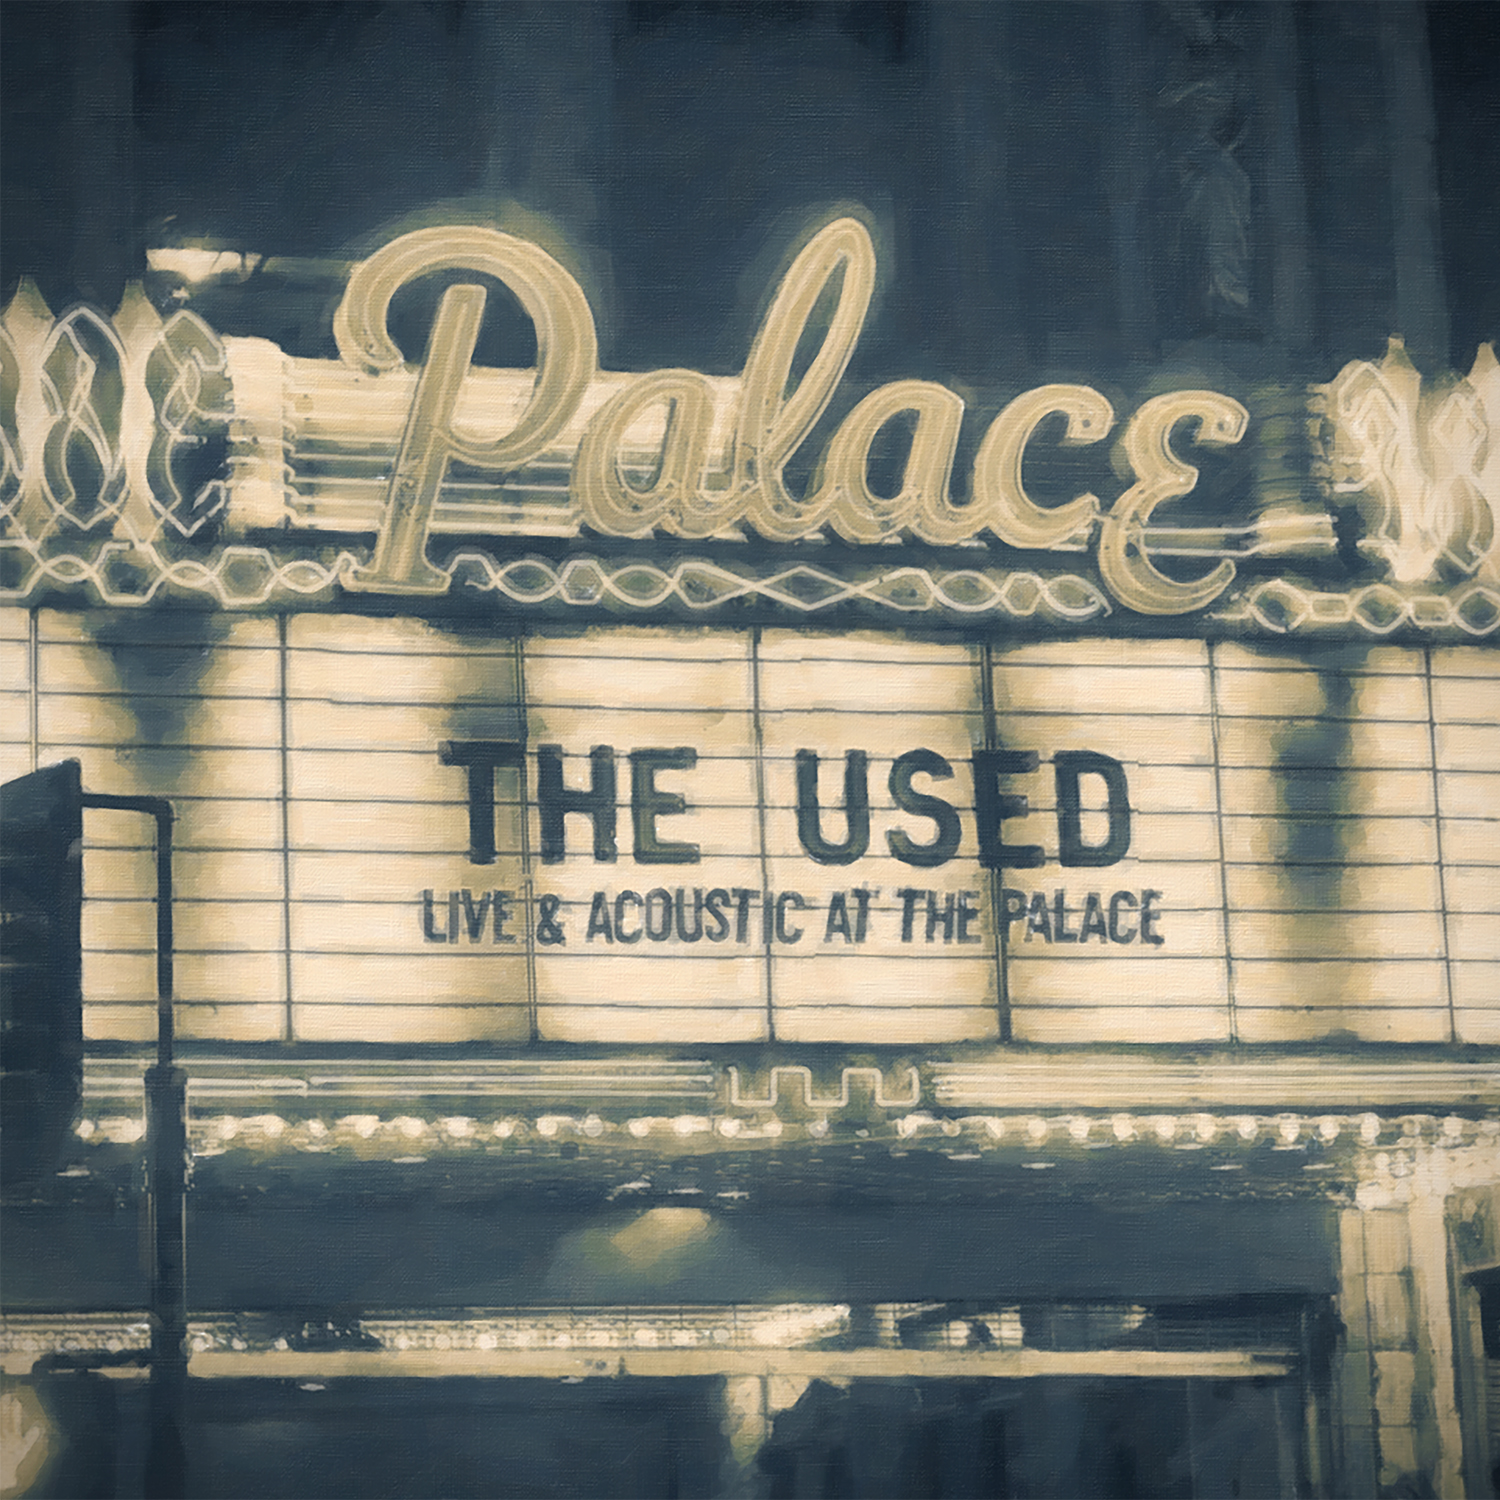 The used the bird. The used Live. The used альбомы. The used группа фотографии. The Bird and the worm the used.